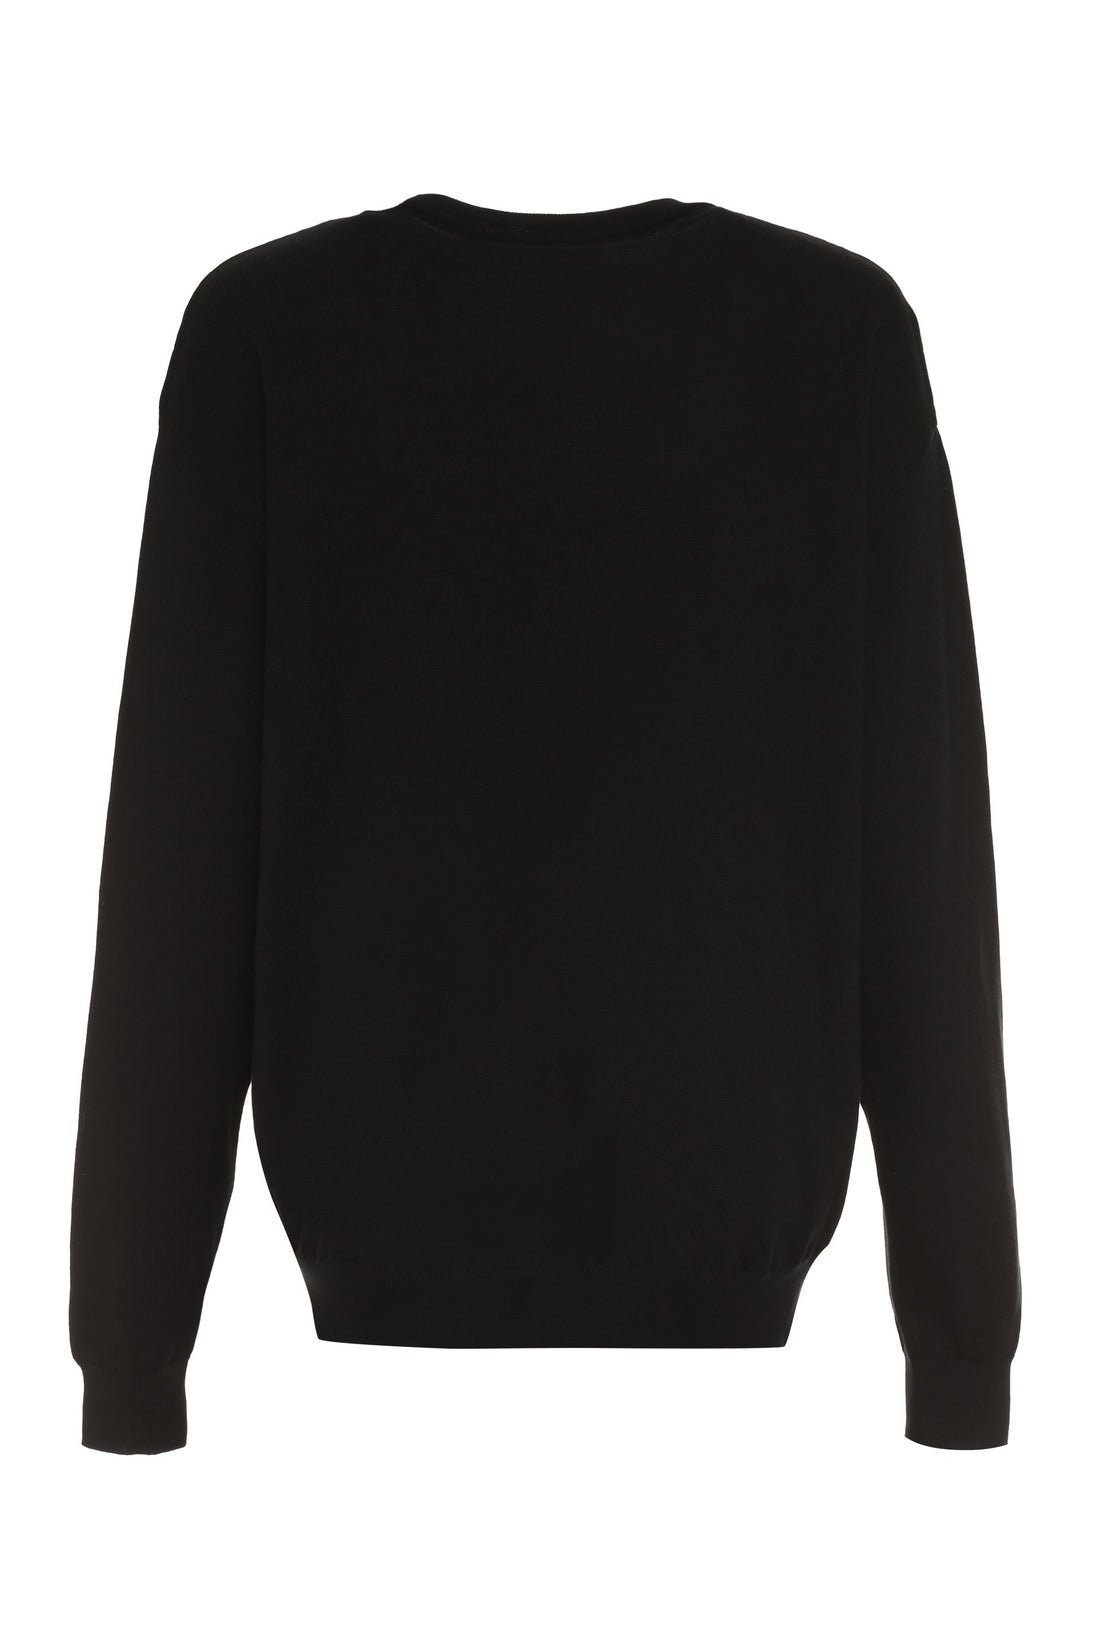 Moschino-OUTLET-SALE-Intarsia cotton sweater-ARCHIVIST